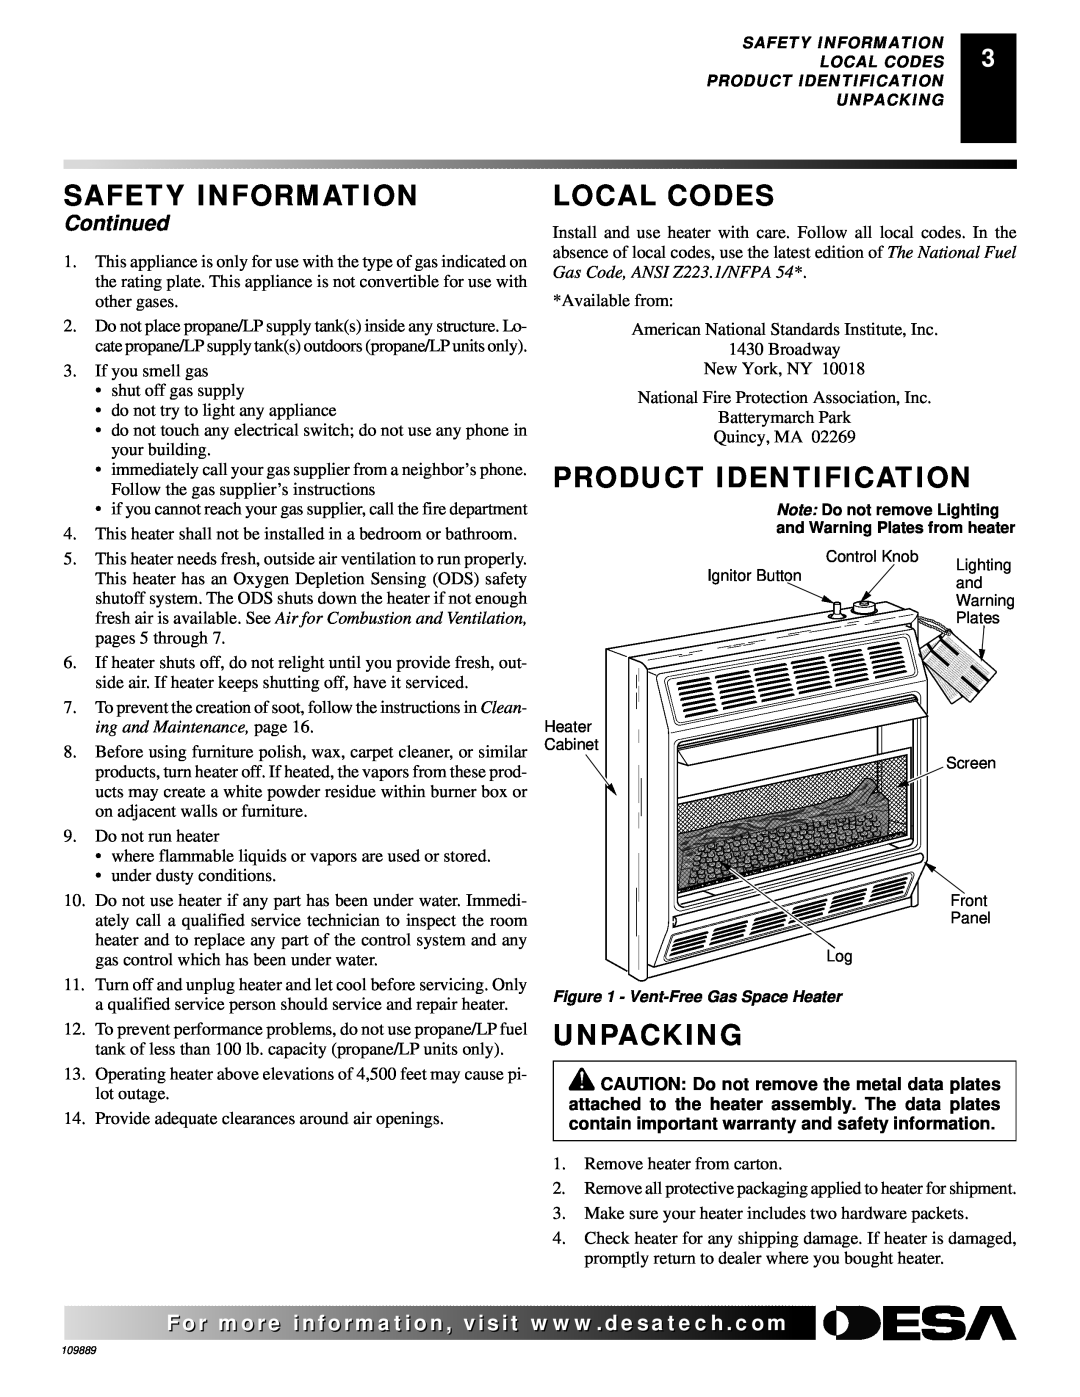 Desa VMH3000TPA installation manual Local Codes, Product Identification, Unpacking, Continued, Safety Information 